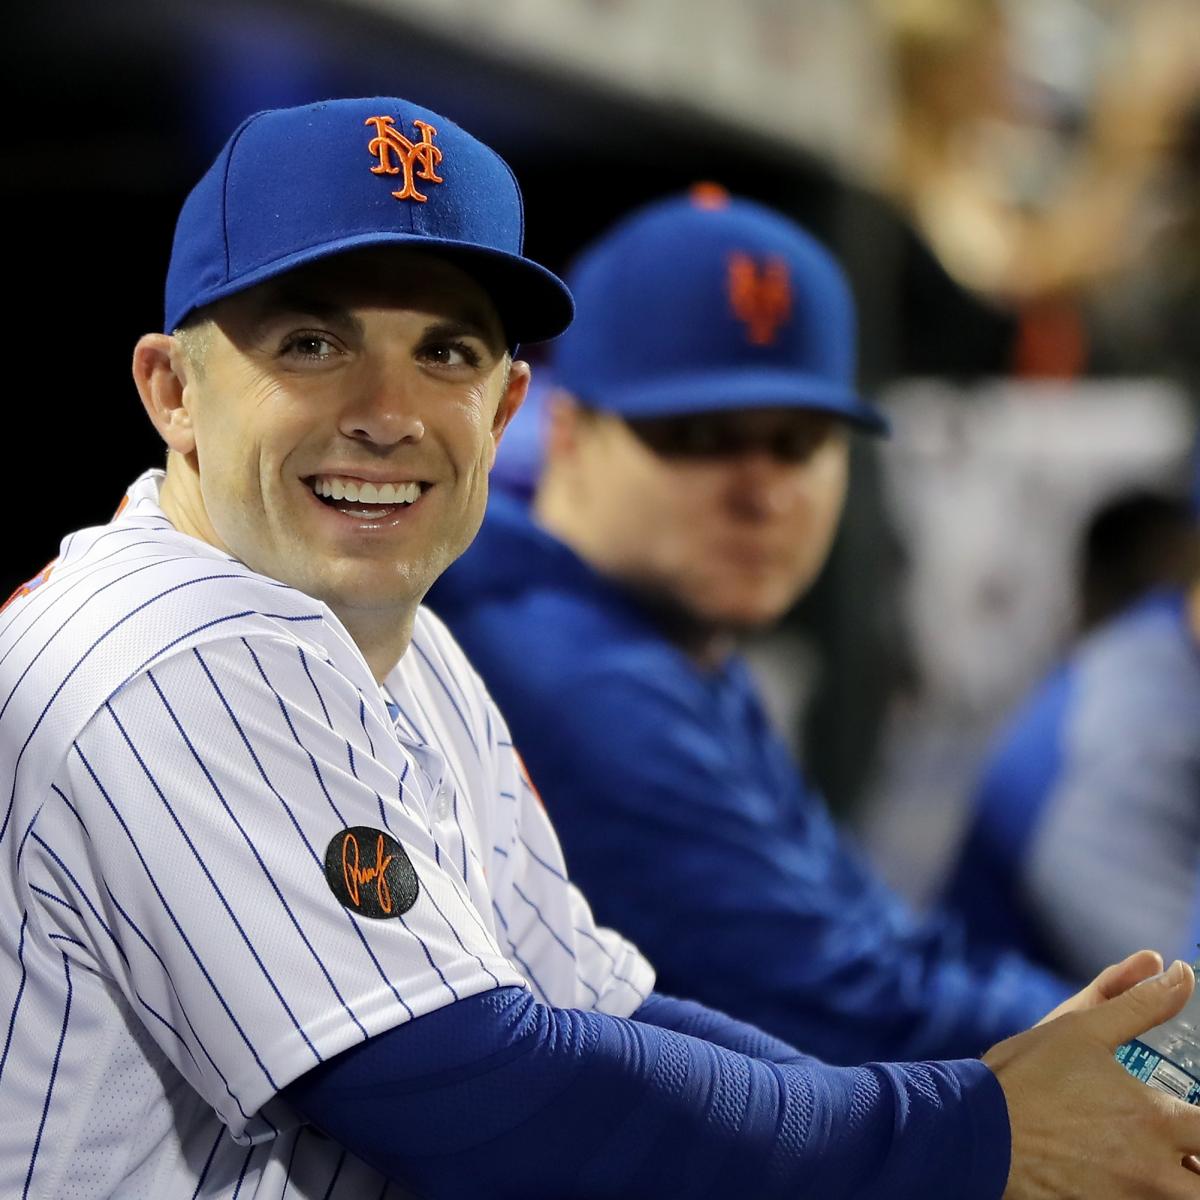 You catch a David Wright Home Run Ball during his last game. What do y